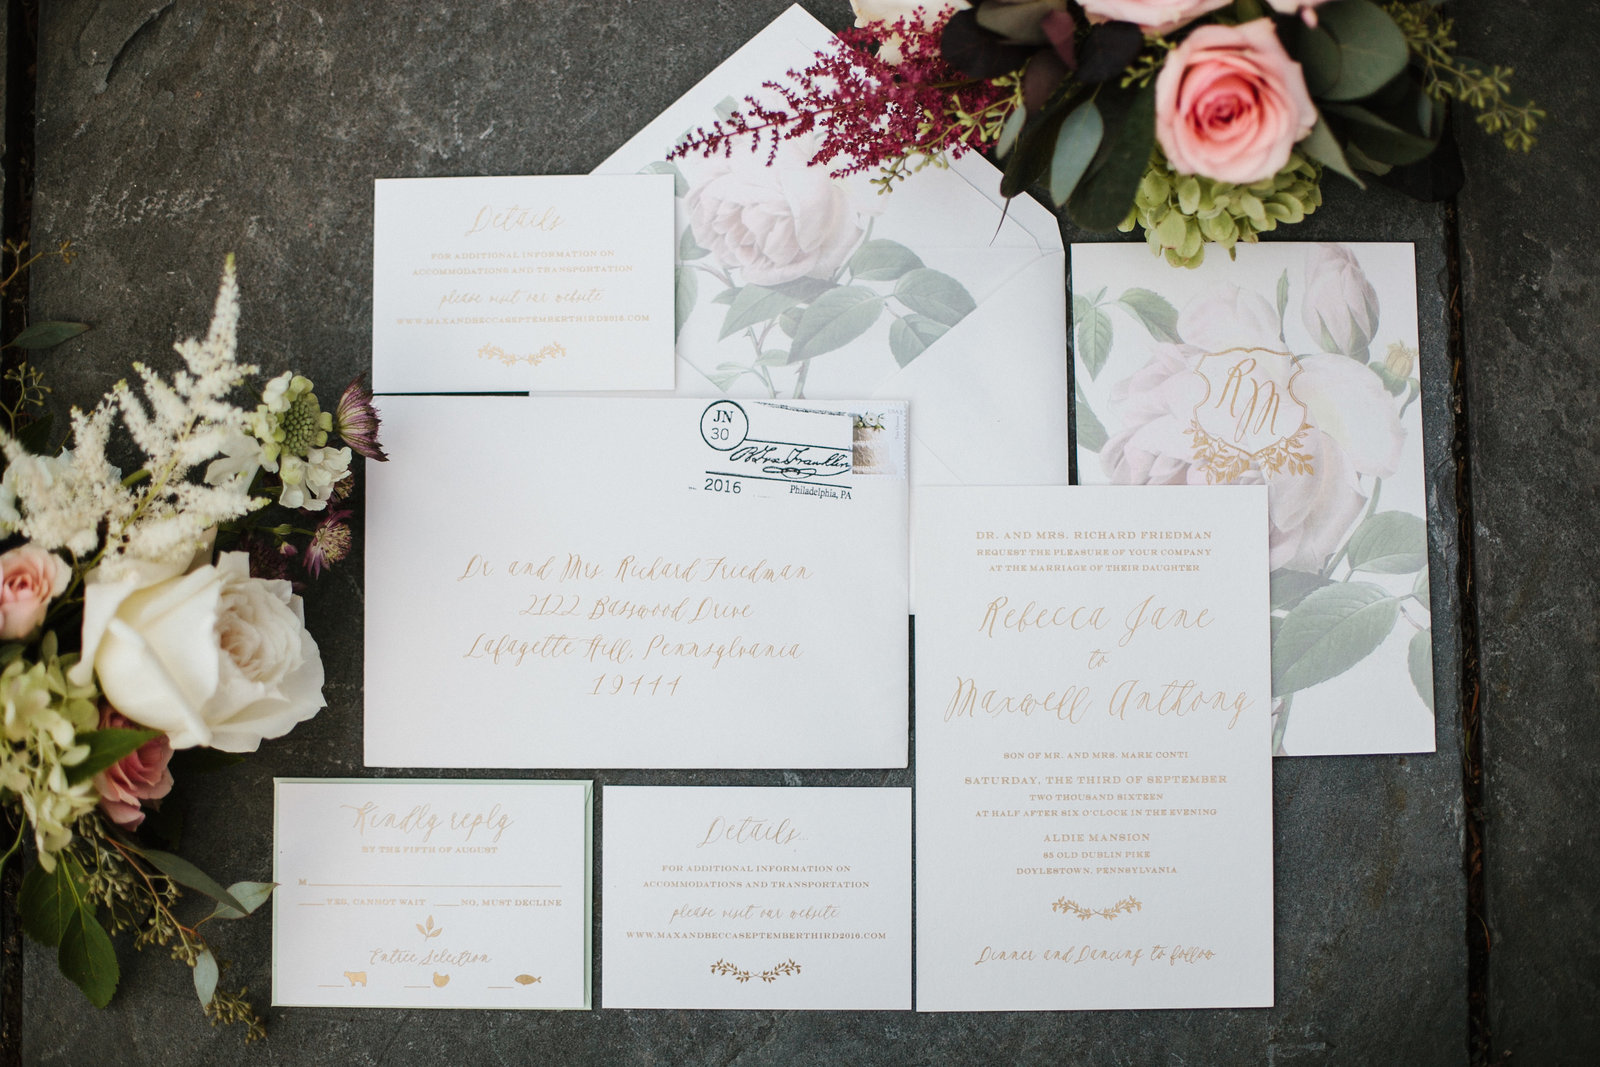 A gorgeous wedding invitation suite, photographed by Sweetwater.